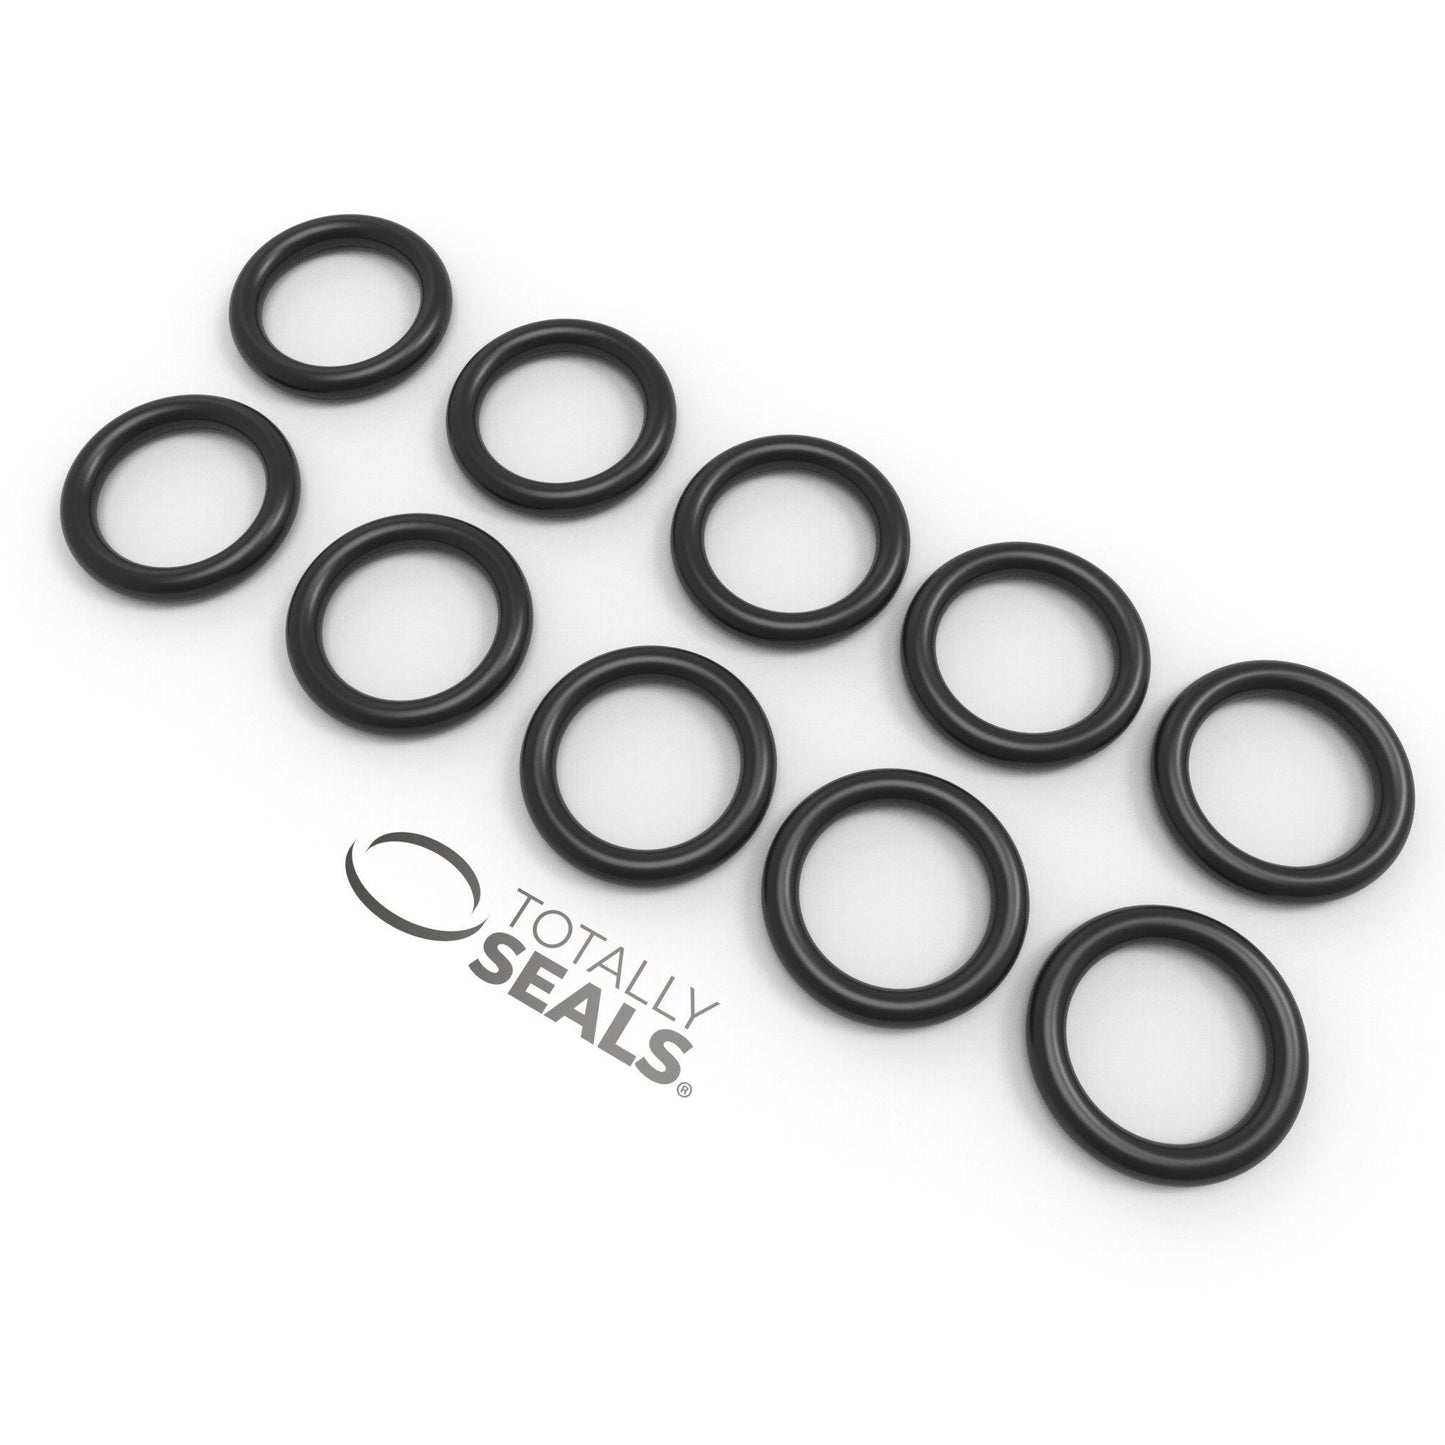 25mm x 2mm (29mm OD) Nitrile O-Rings - Totally Seals®